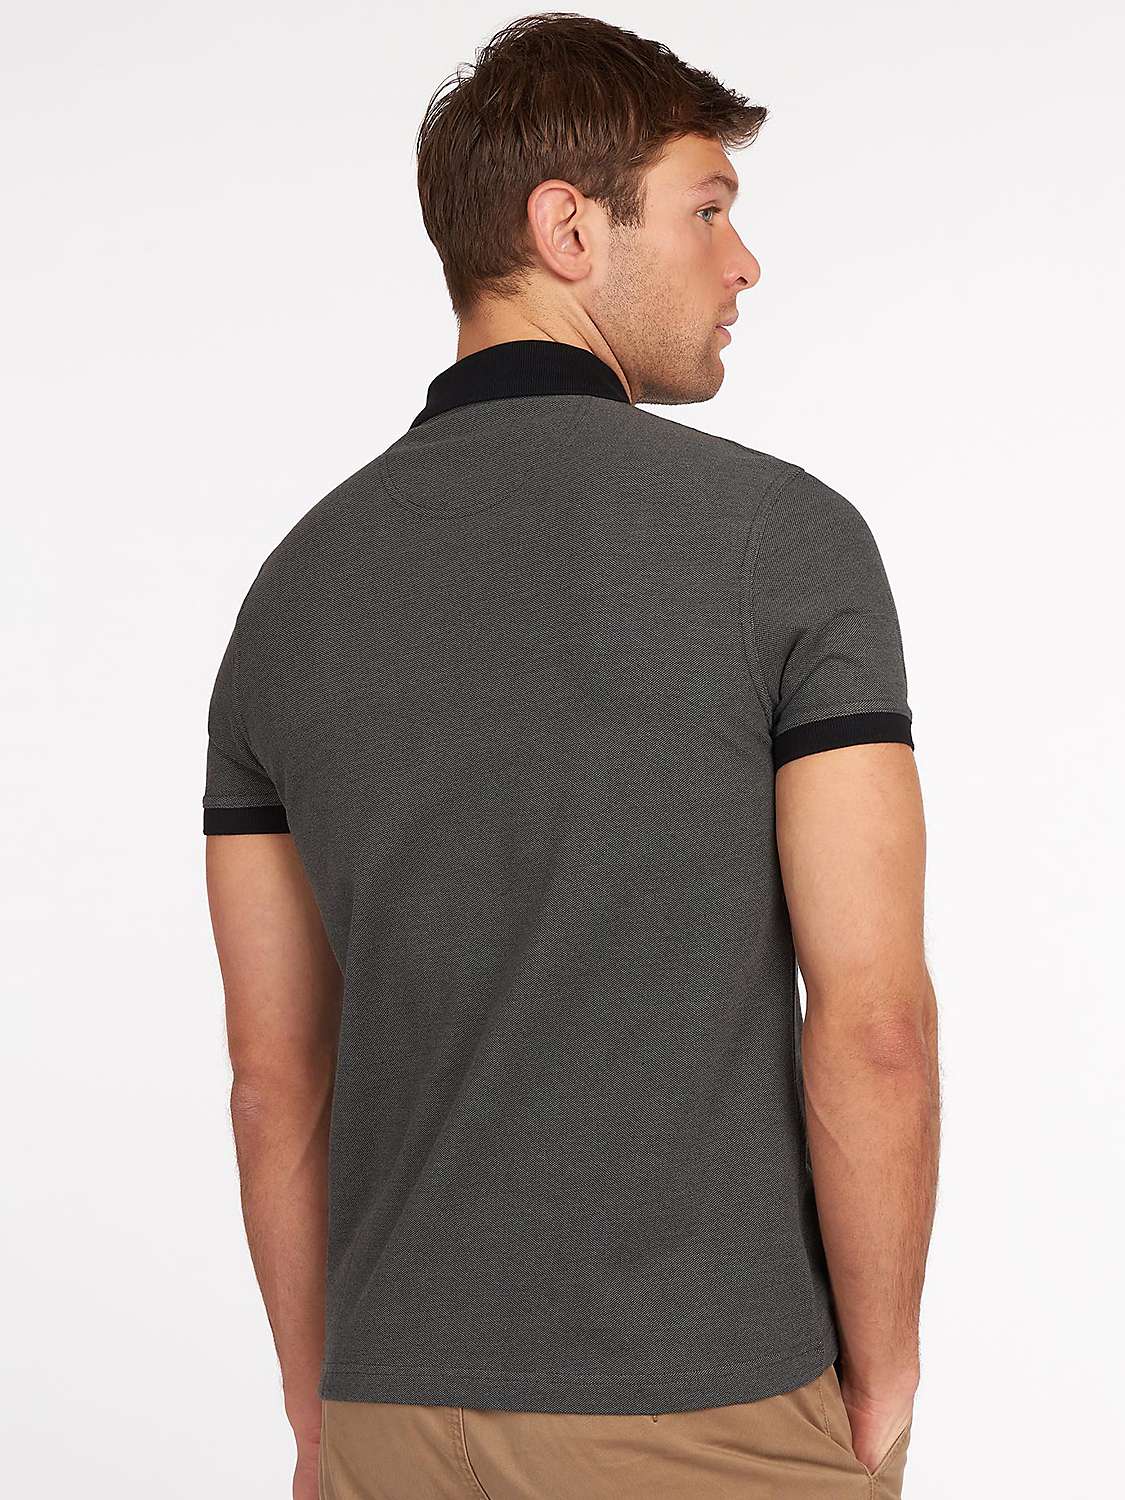 Buy Barbour Sports Polo Shirt Online at johnlewis.com